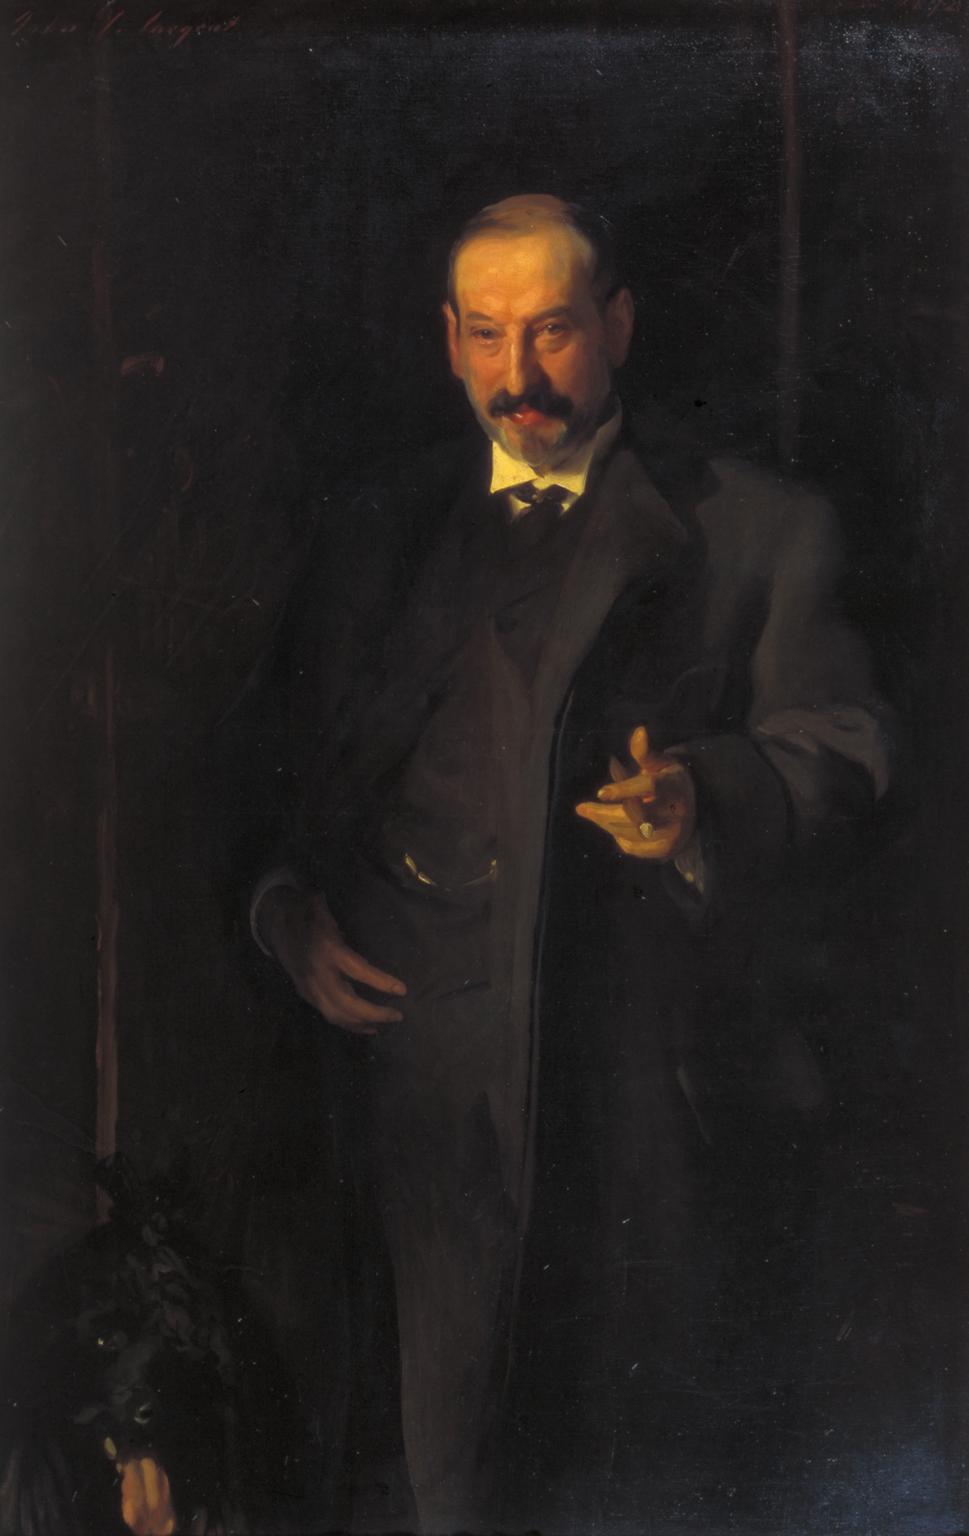 Oil painting of a middle-aged man in a dark suit against a dark background, holding a cigar